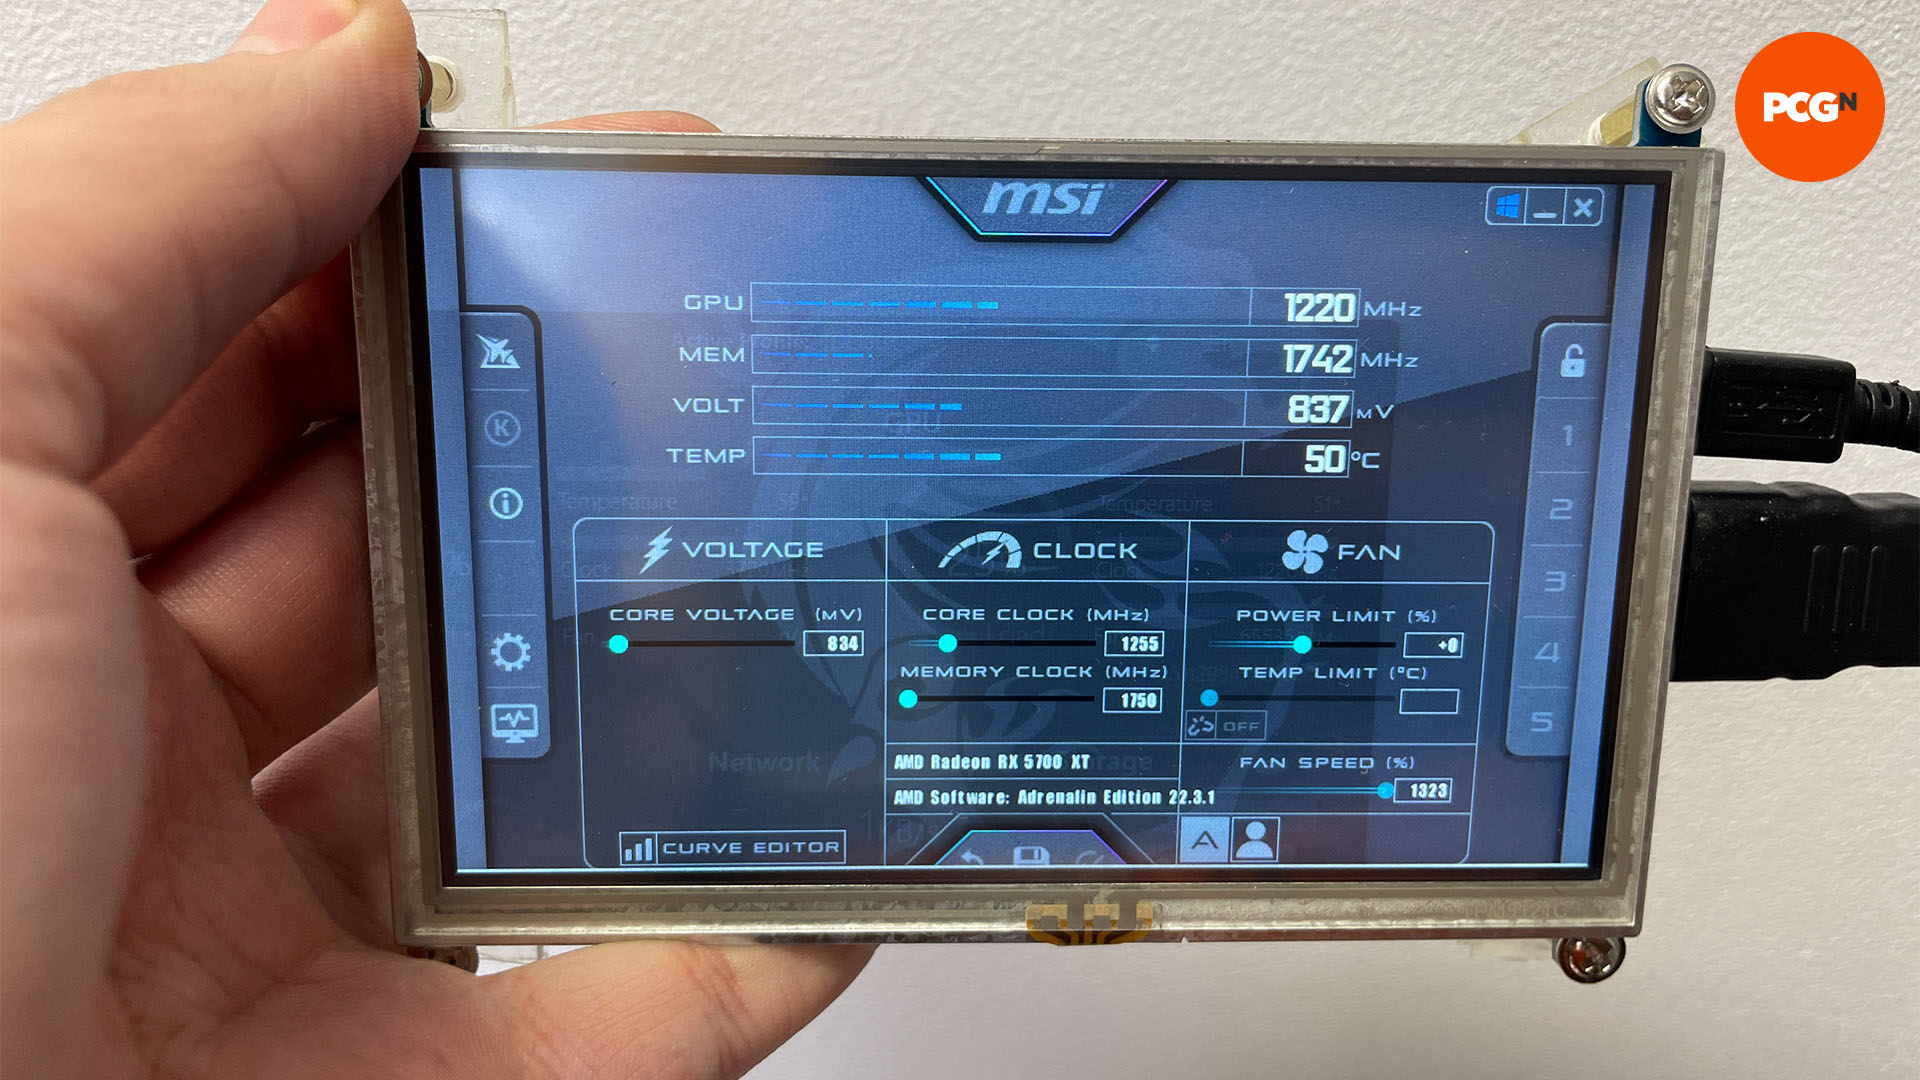 How to fit a screen in your PC case: MSI Afterburner on 5-inch screen